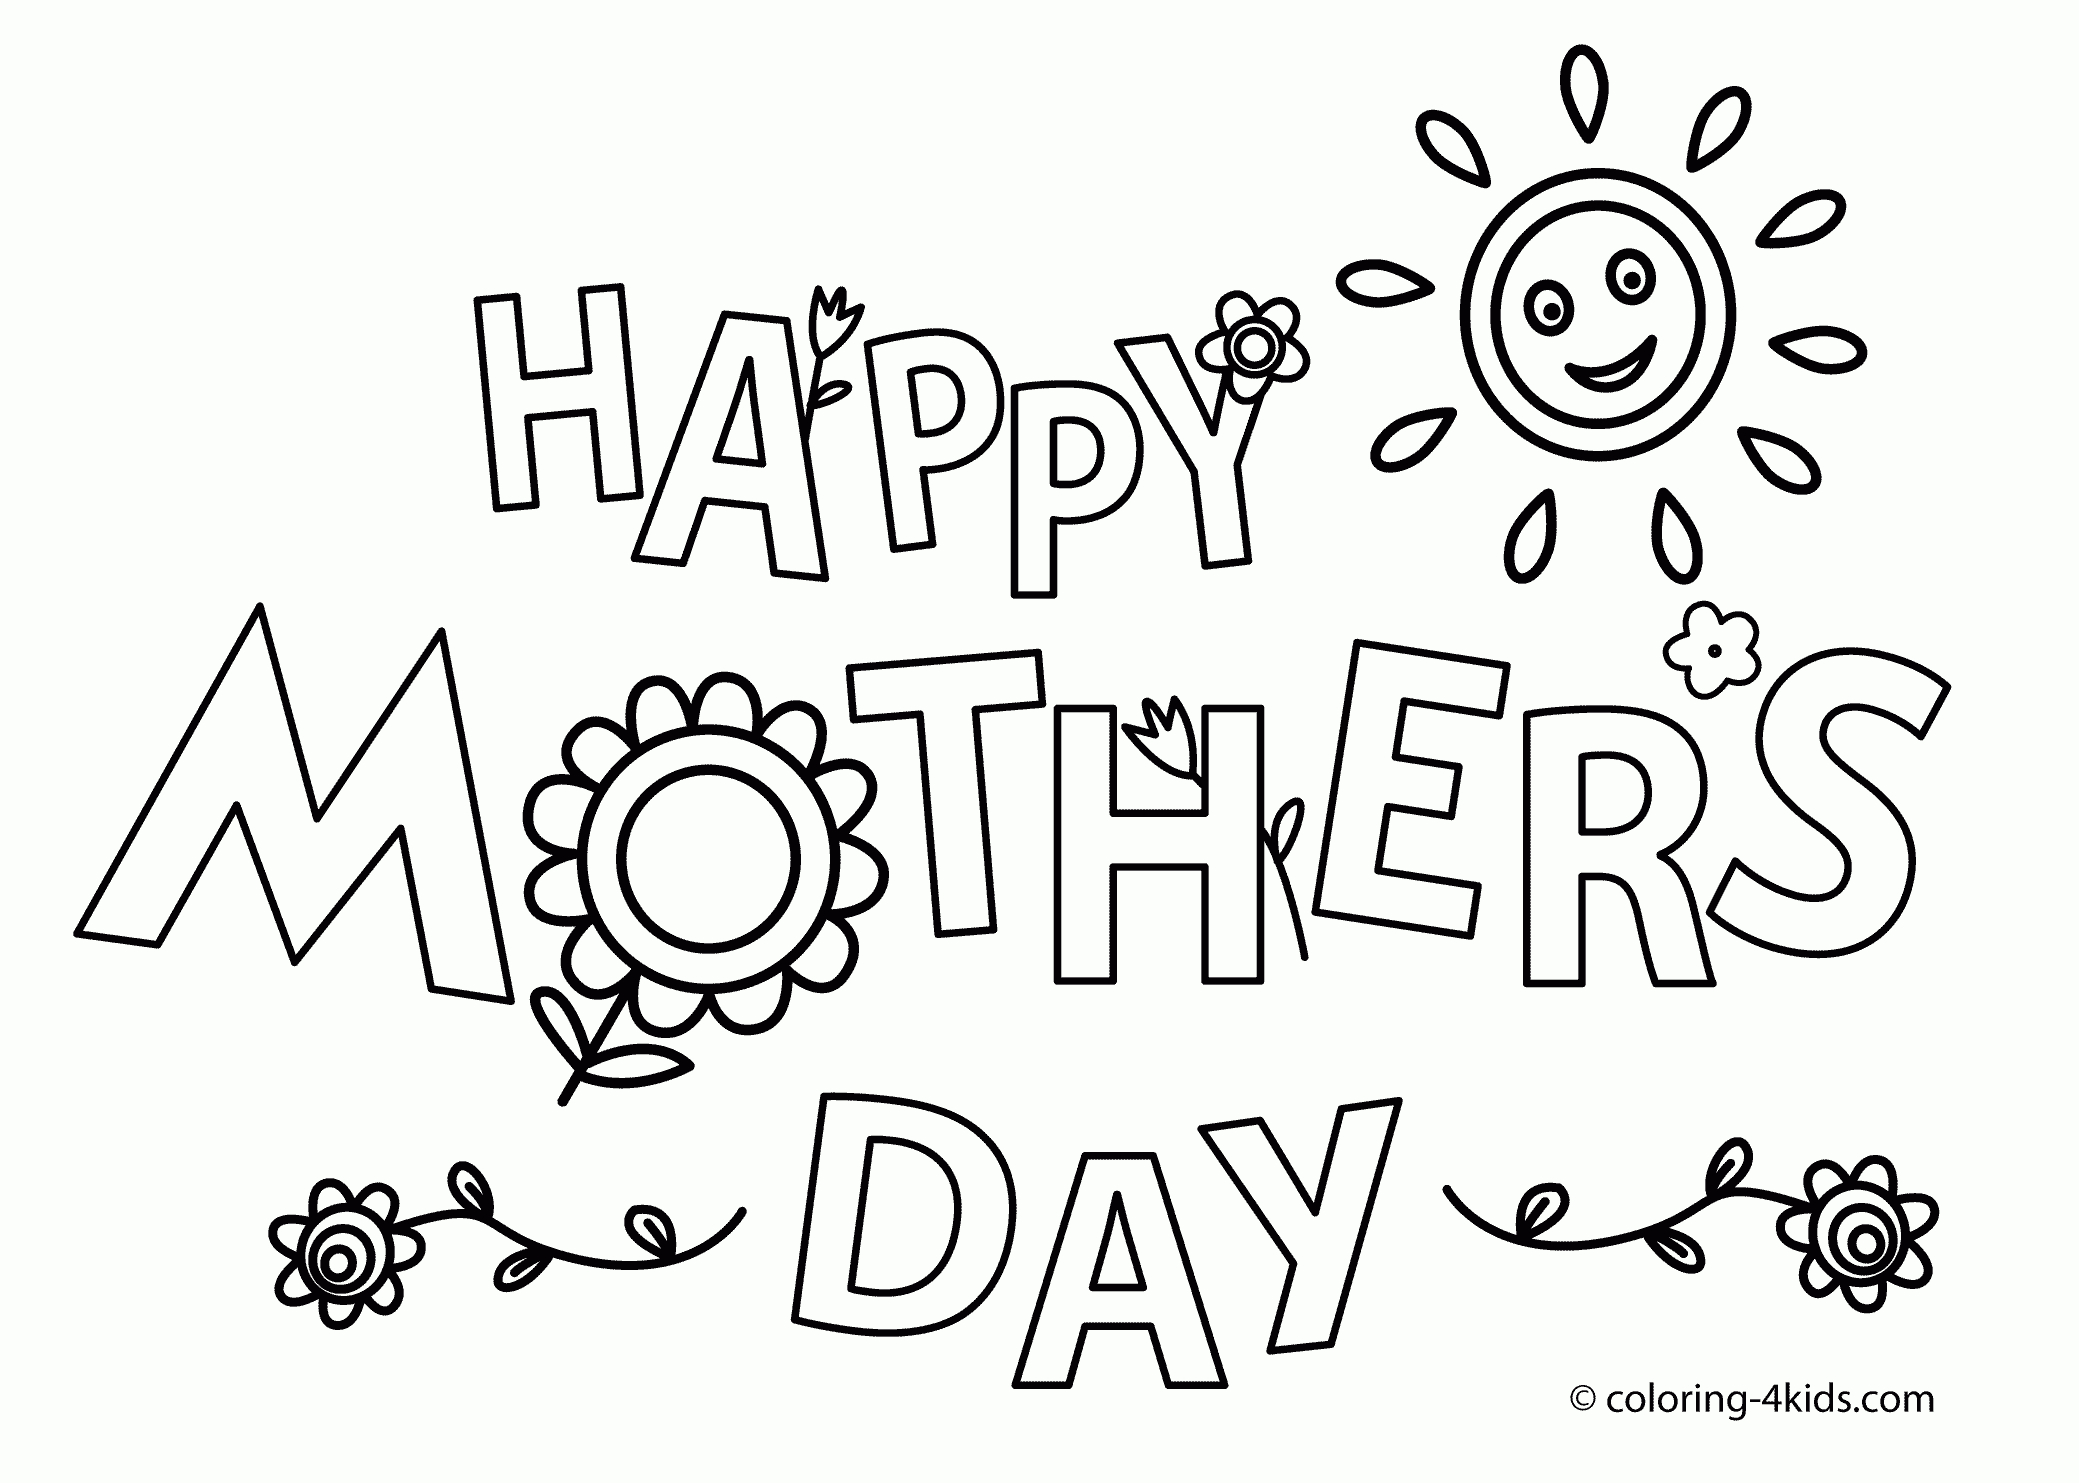 Free Printable Mothers Day Coloring Pages - Free Printable Calendar - Free Printable Mothers Day Coloring Sheets